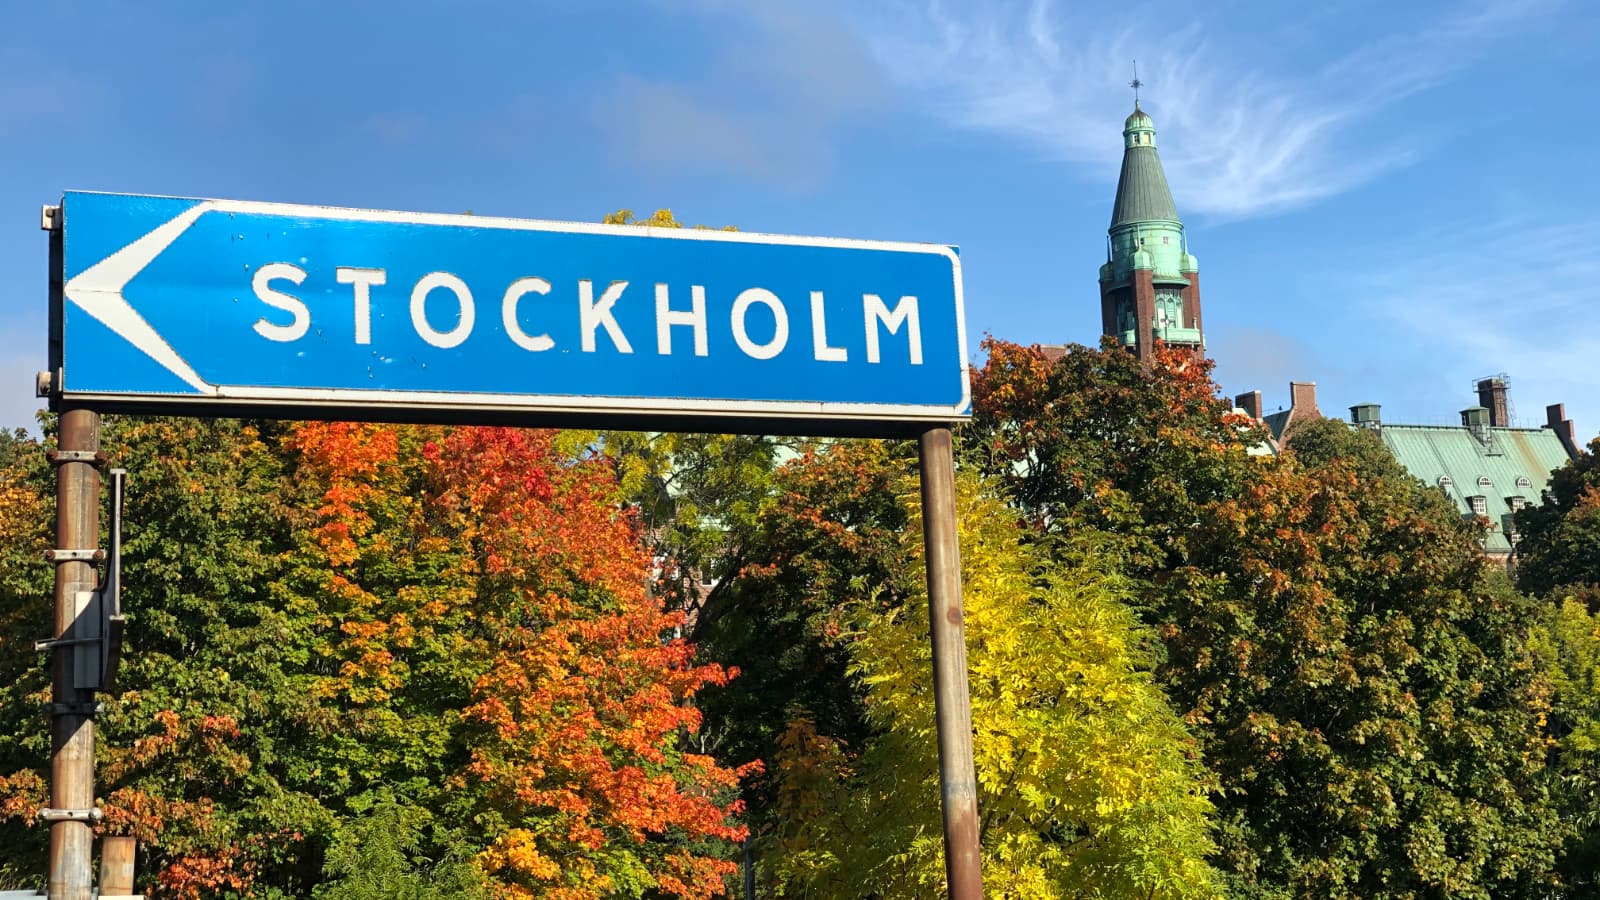 Road sign for Stockholm surrounded by trees with leaves changing colors